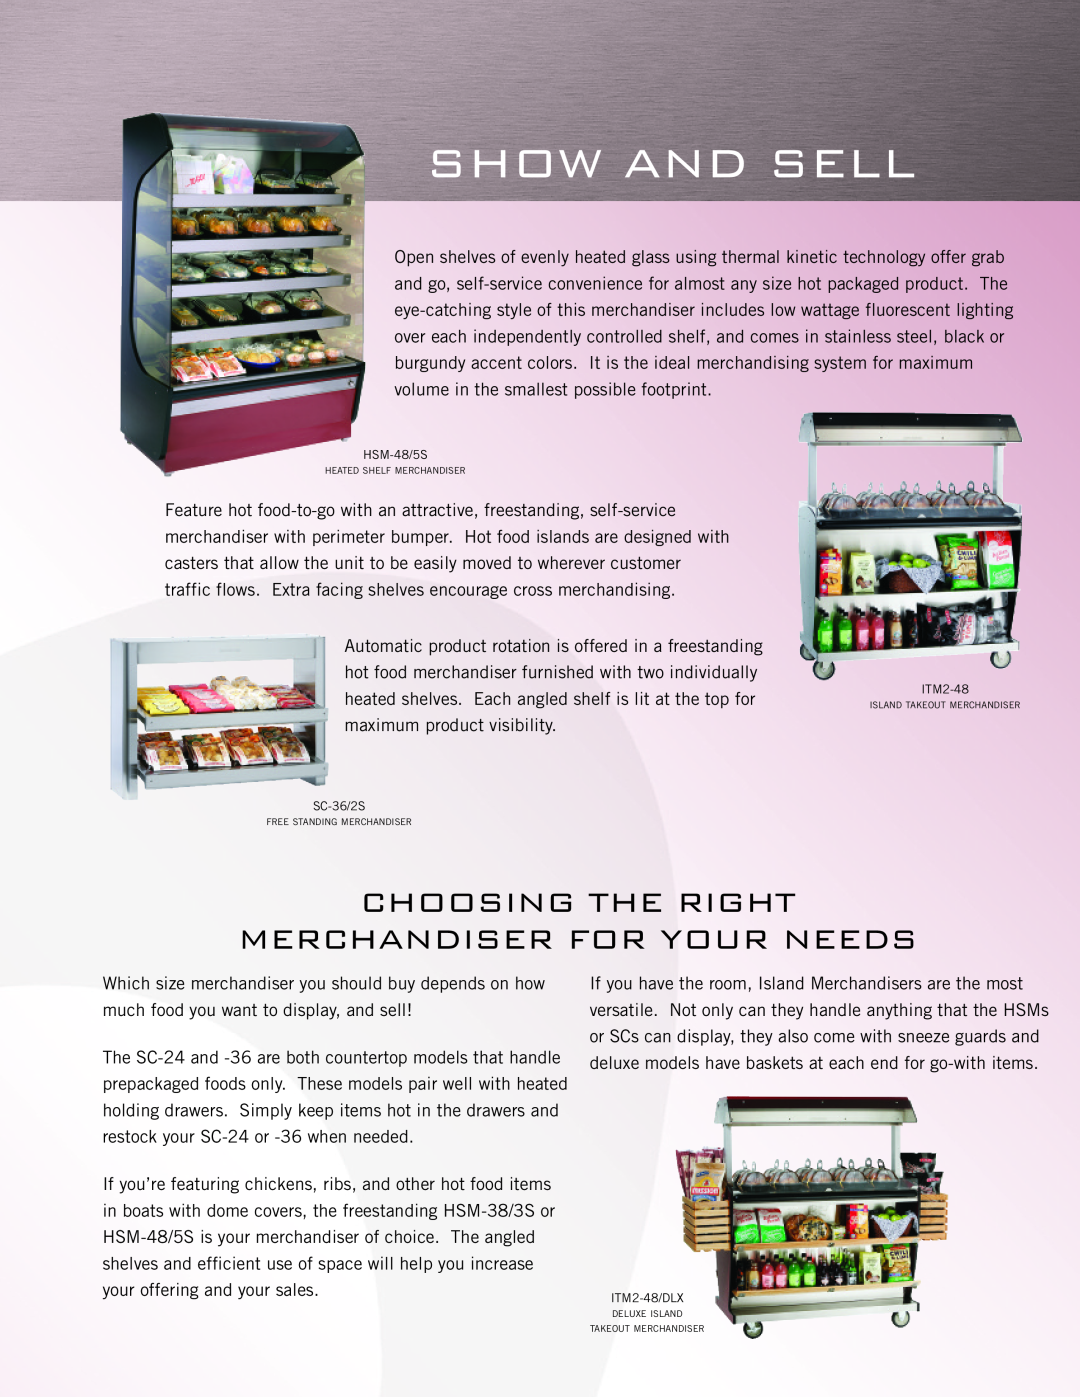 Alto-Shaam SC-36/2S manual Show And Sell, Choosing The Right Merchandiser For Your Needs 